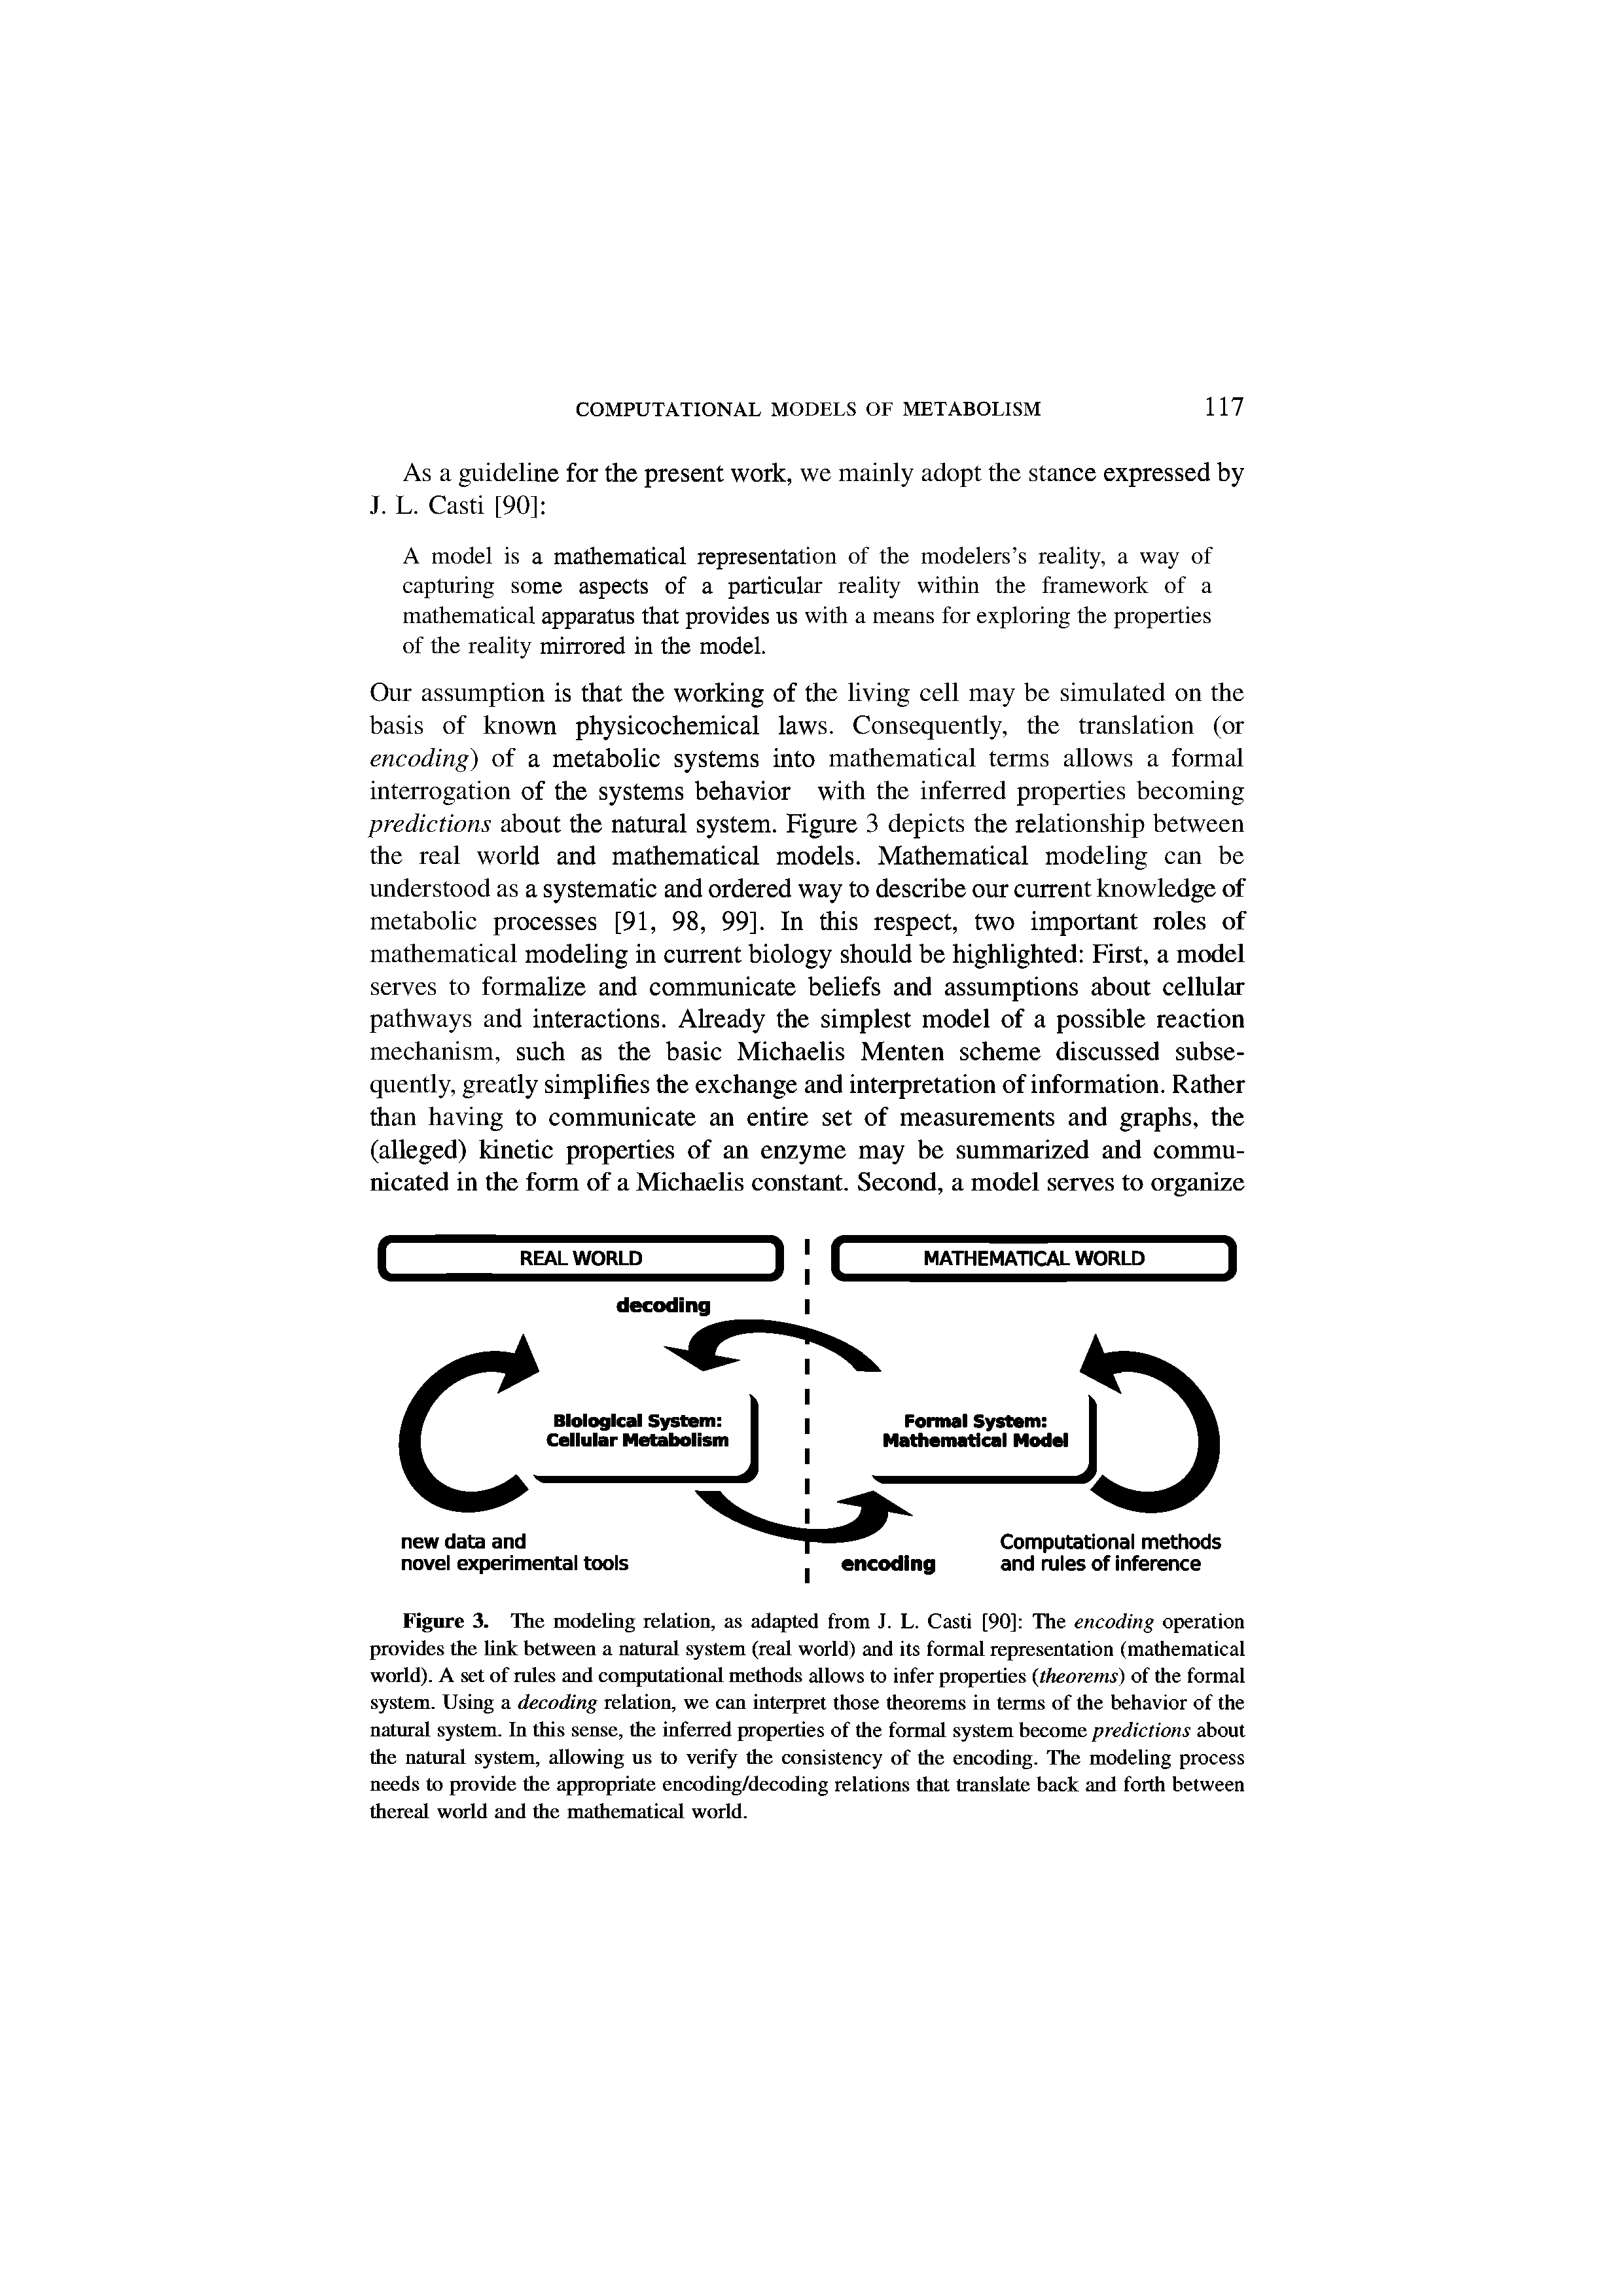 Figure 3. The modeling relation, as adapted from J. L. Casti [90] The encoding operation provides the link between a natural system (real world) and its formal representation (mathematical world). A set of rules and computational methods allows to infer properties (theorems) of the formal system. Using a decoding relation, we can interpret those theorems in terms of the behavior of the natural system. In this sense, the inferred properties of the formal system become predictions about the natural system, allowing us to verify the consistency of the encoding. The modeling process needs to provide the appropriate encoding/decoding relations that translate back and forth between thereal world and the mathematical world.